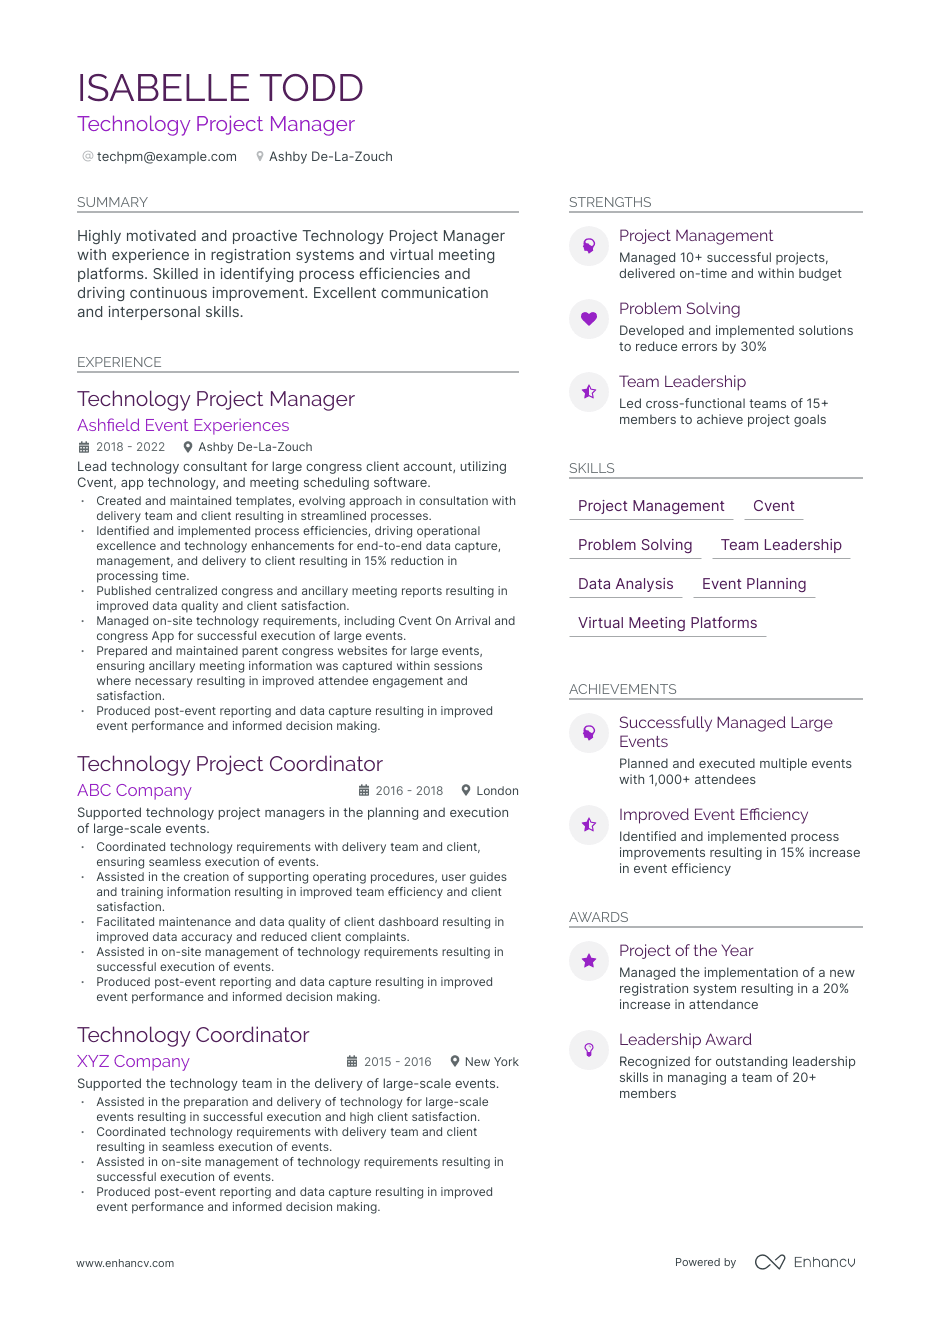 Technology Project Manager resume example